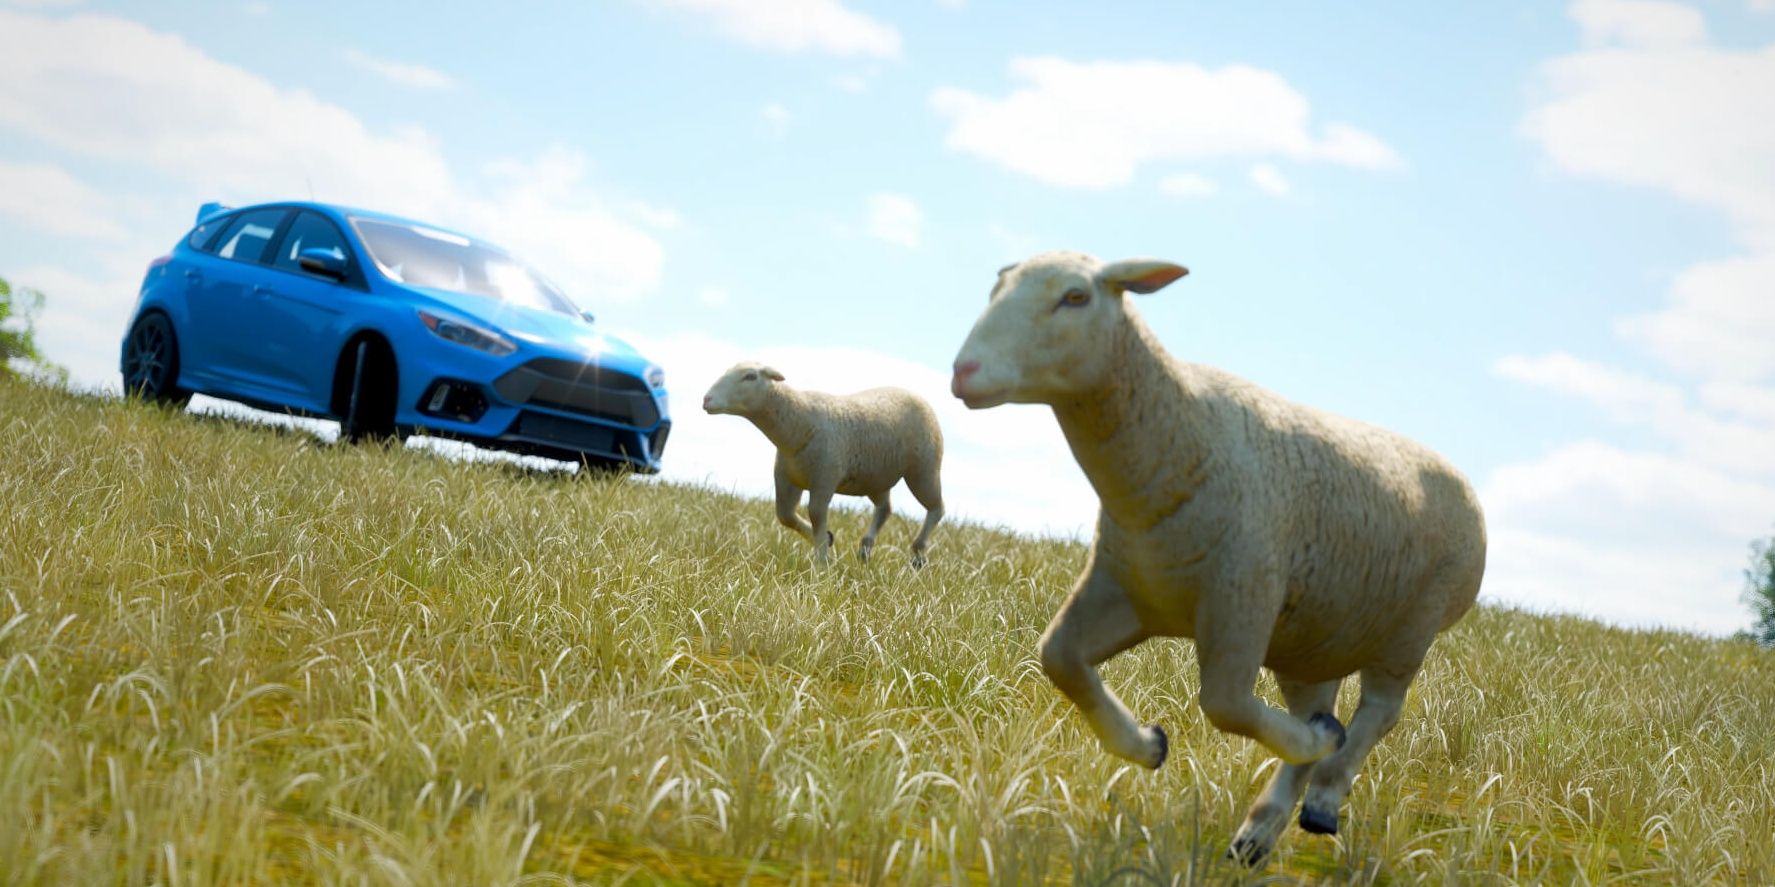 sheep running with a car in the background 